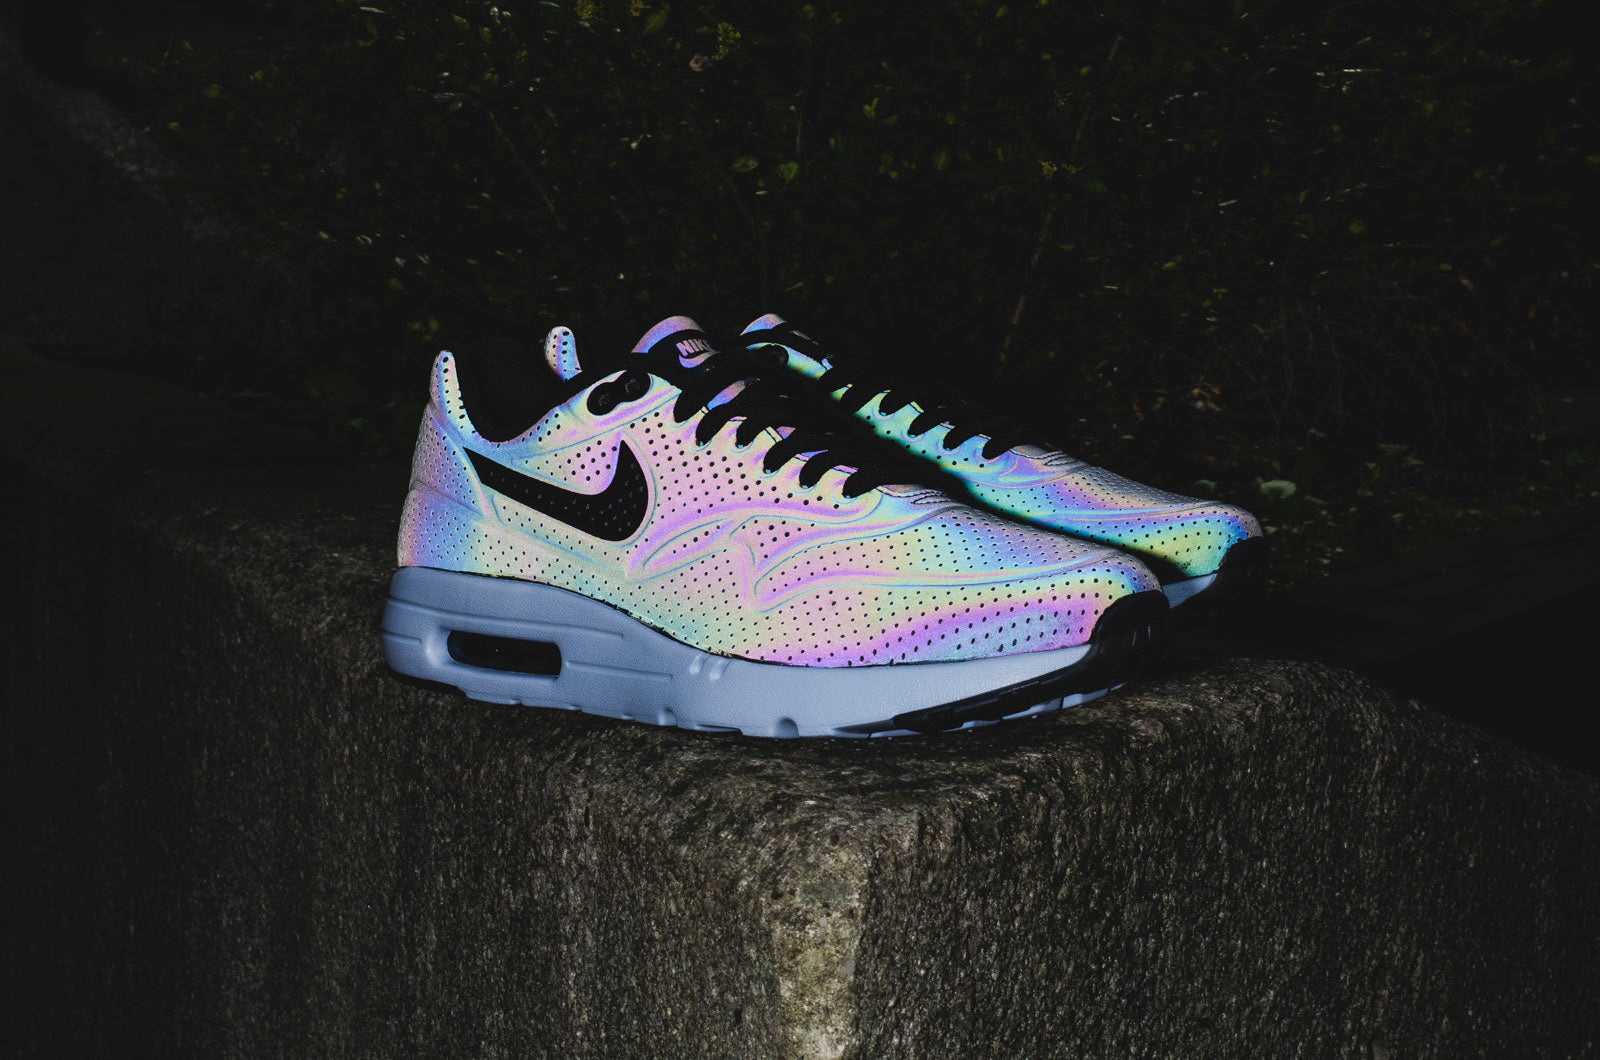 Nike Air Max 1 Ultra Moire "Iridescent" –